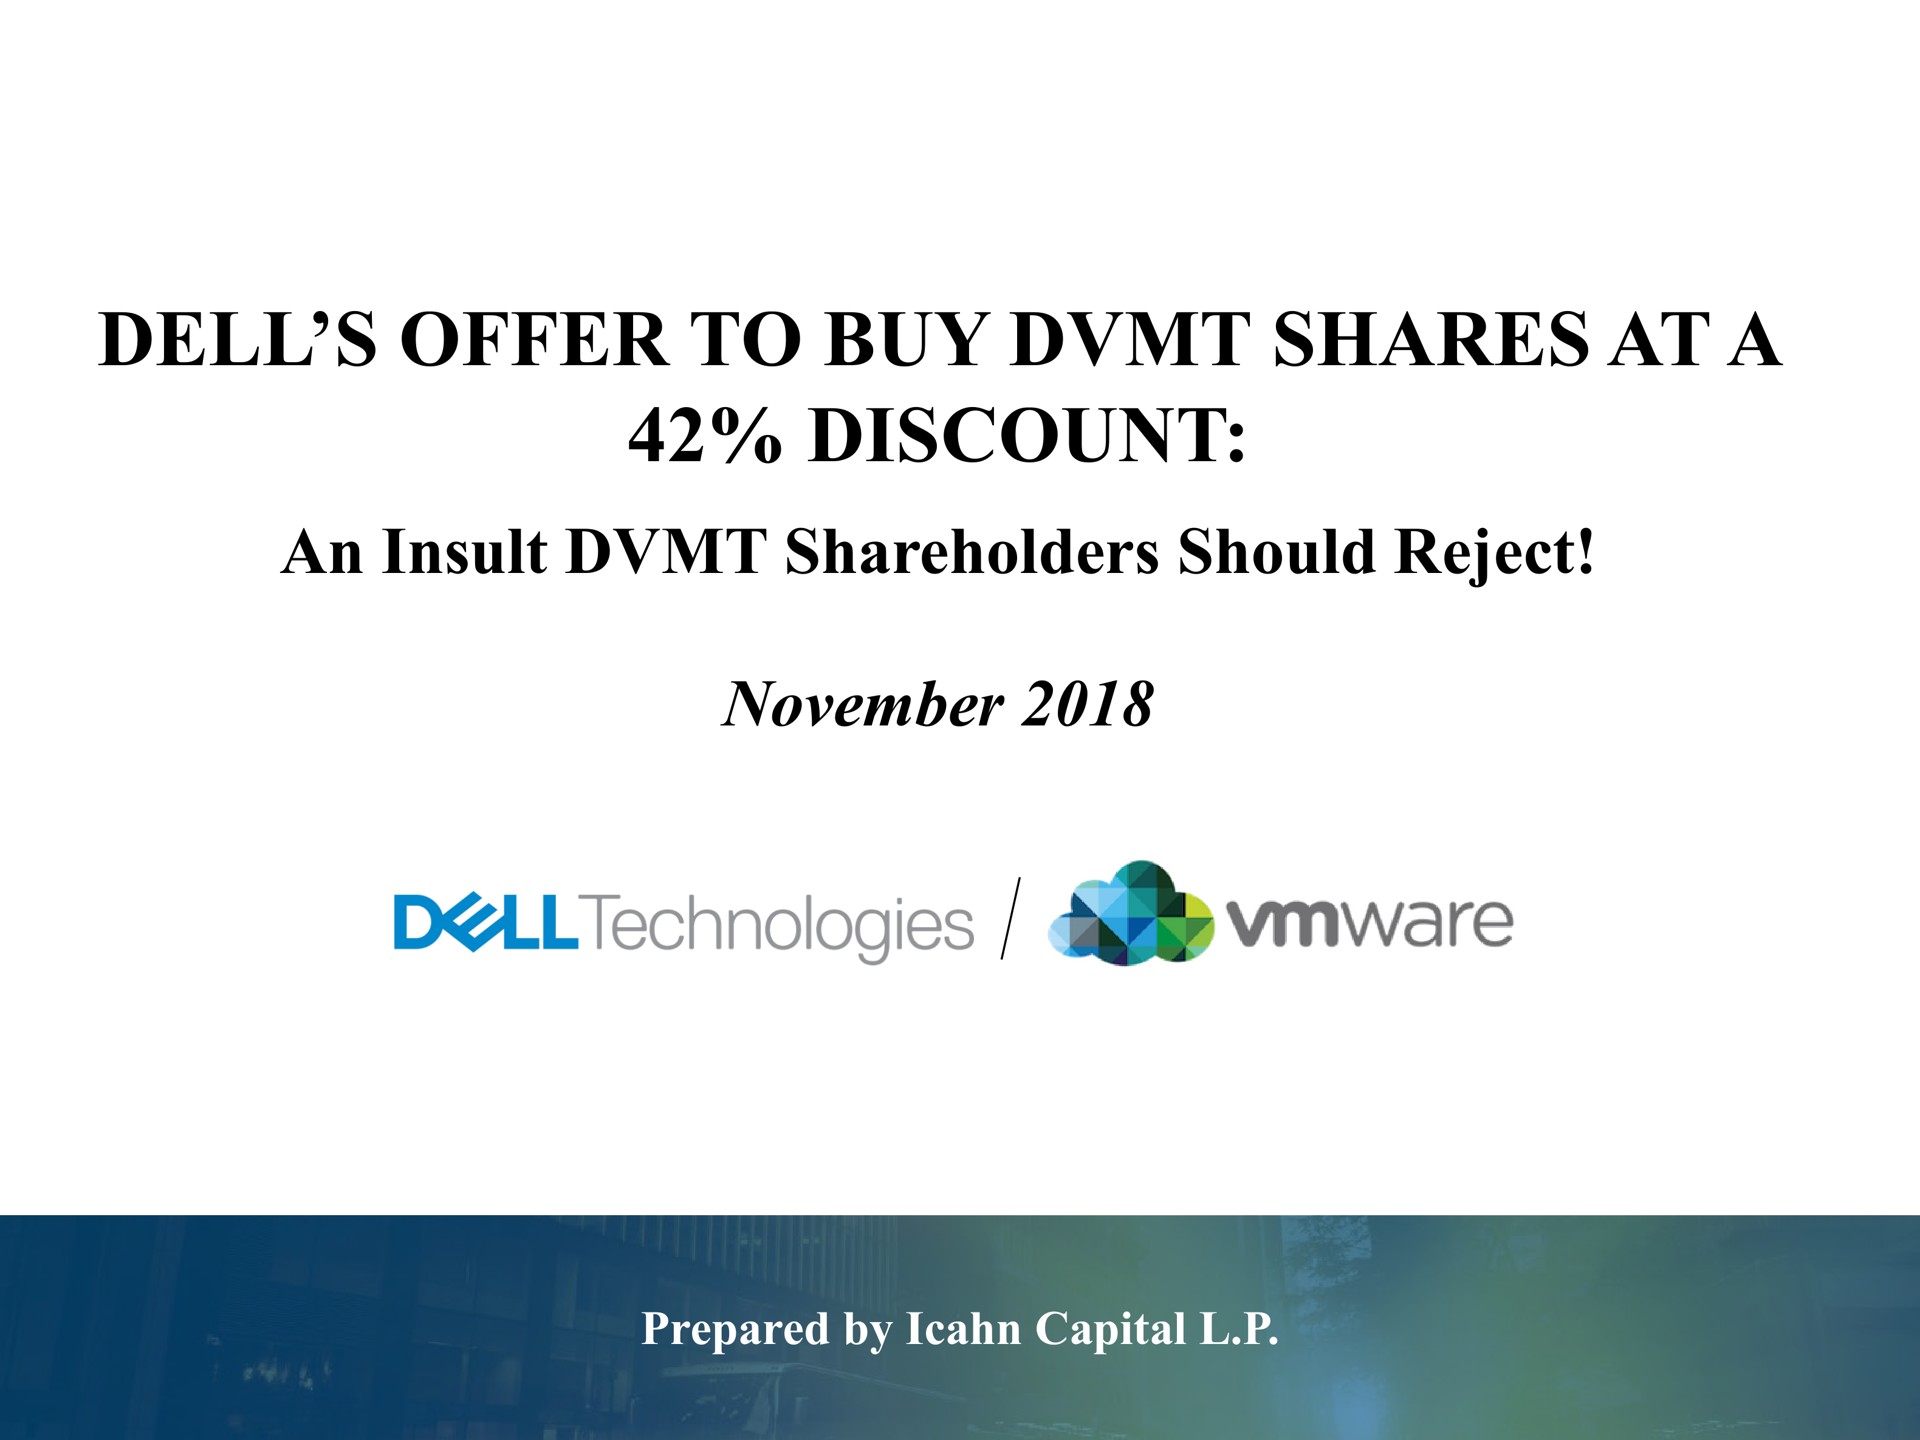 dell offer to buy shares at a discount an insult shareholders should reject prepared by capital technologies | Icahn Enterprises